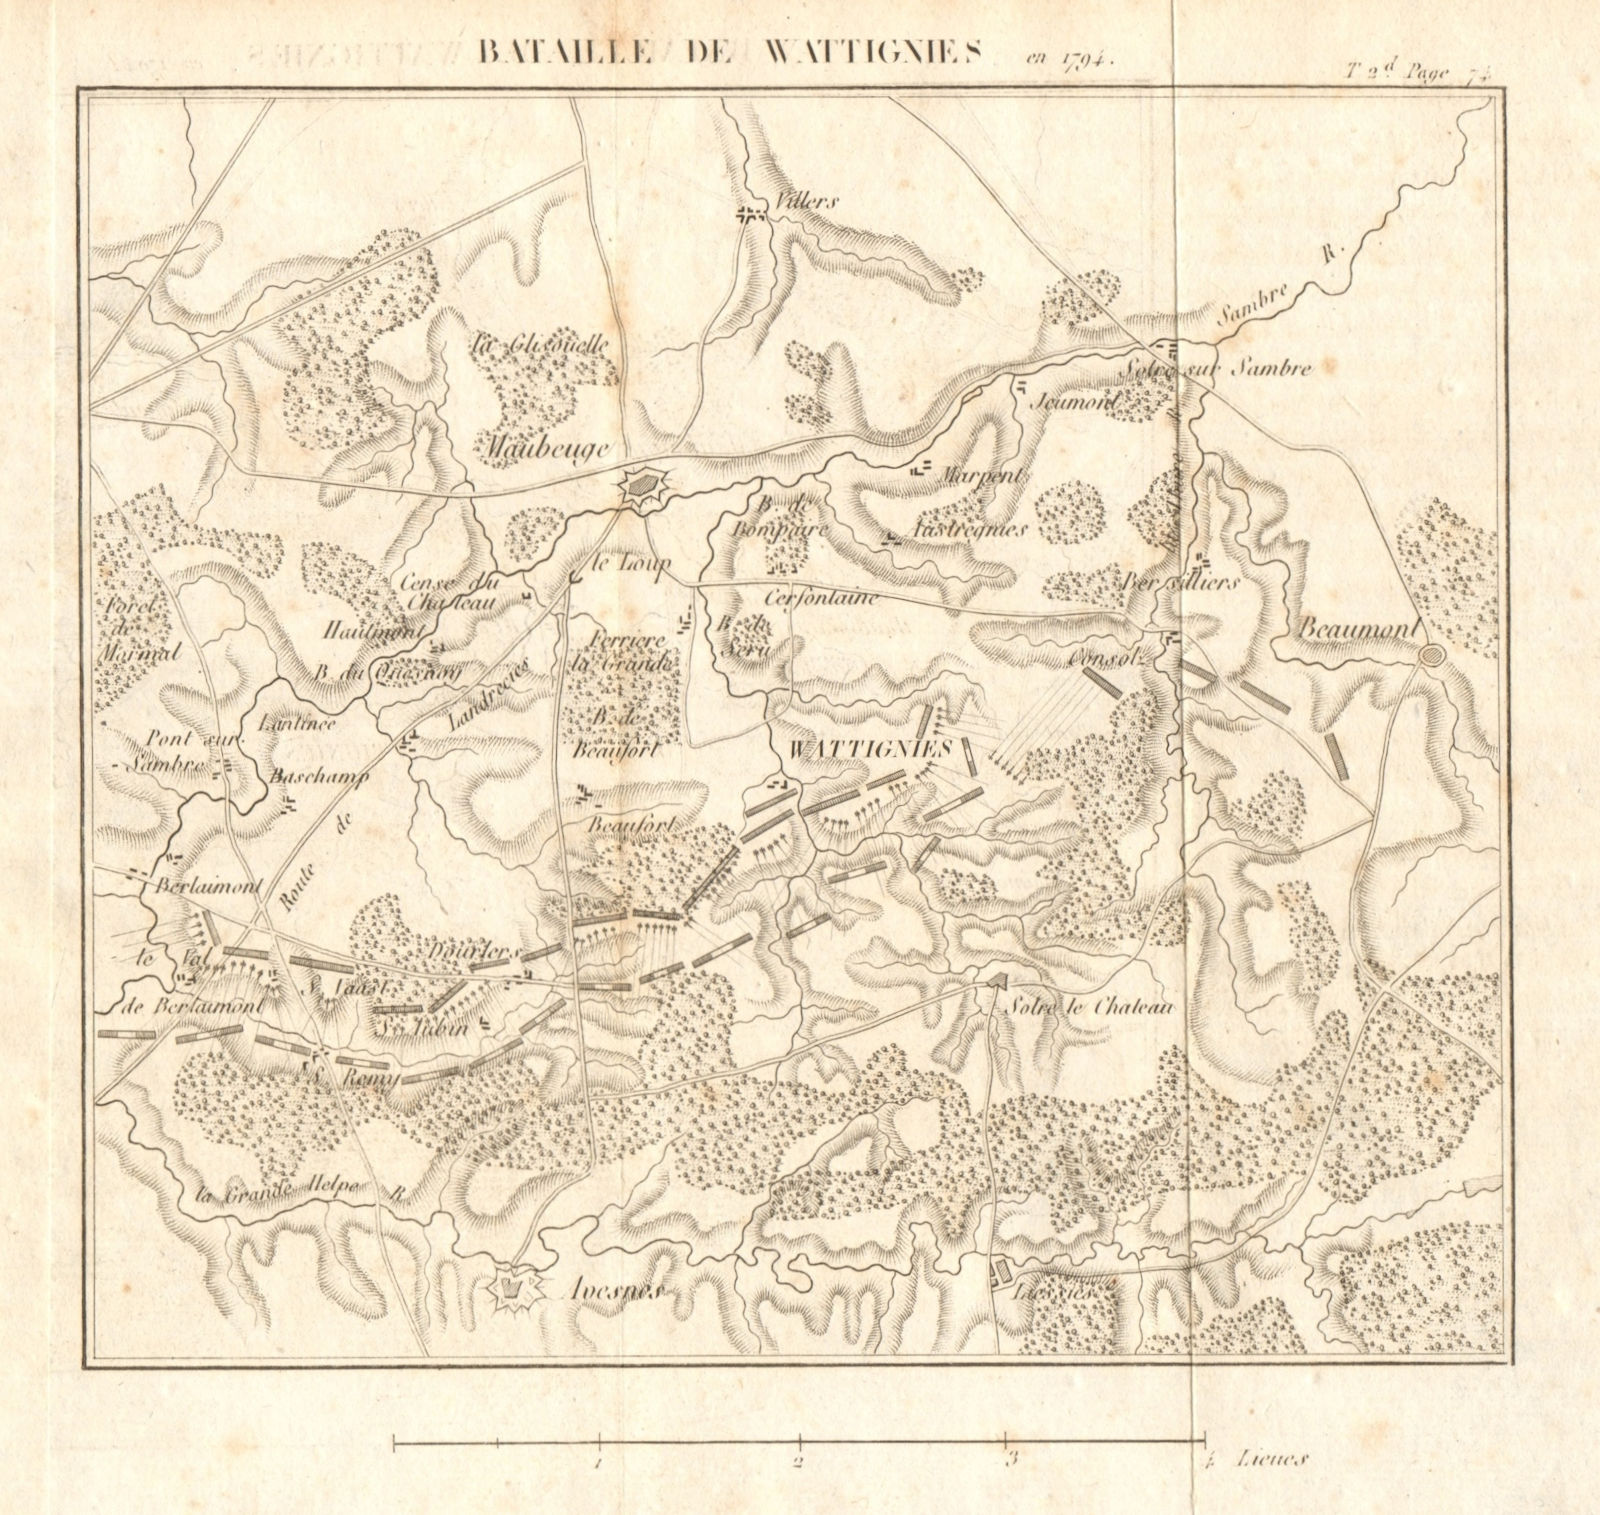 Associate Product Battle of Wattignies in 1794. War of the First Coalition. Nord 1817 old map